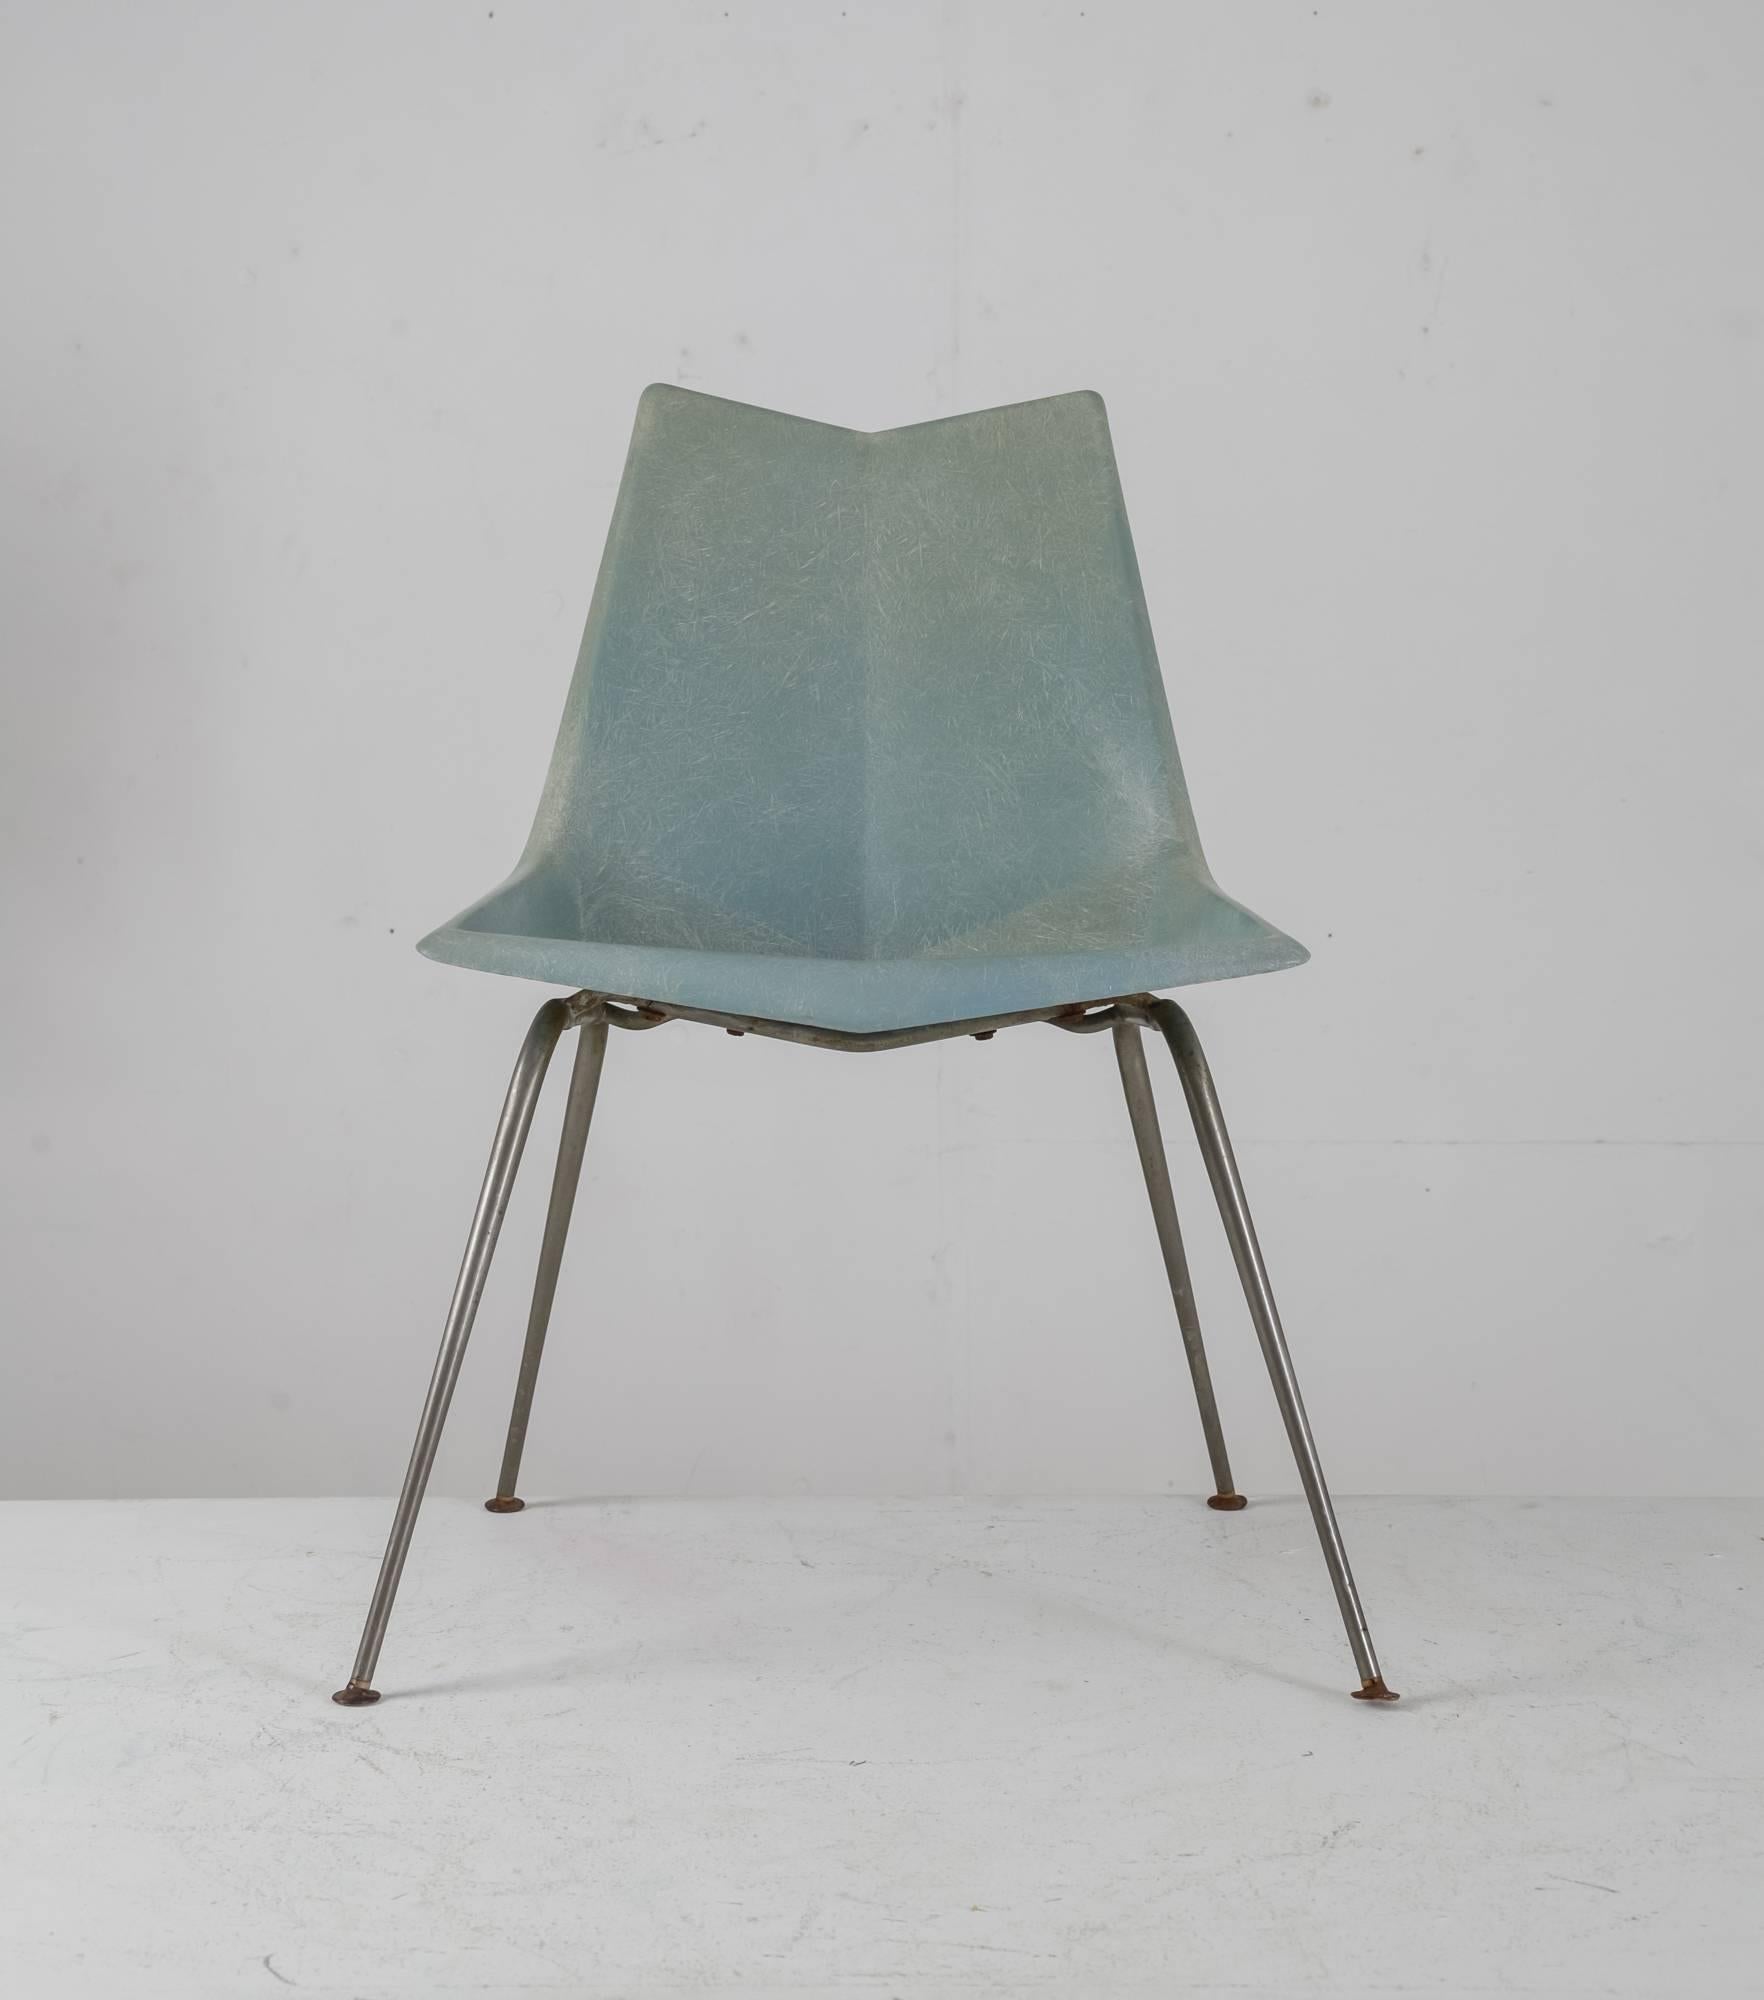 A 1950s light blue-grey Paul McCobb Origami chair for St. John Seating. The fiberglass seat is molded at angles, reminiscent of the Japanese origami technique. The chair stands on tubular iron legs. 
Labeled and in a good and original condition.
  